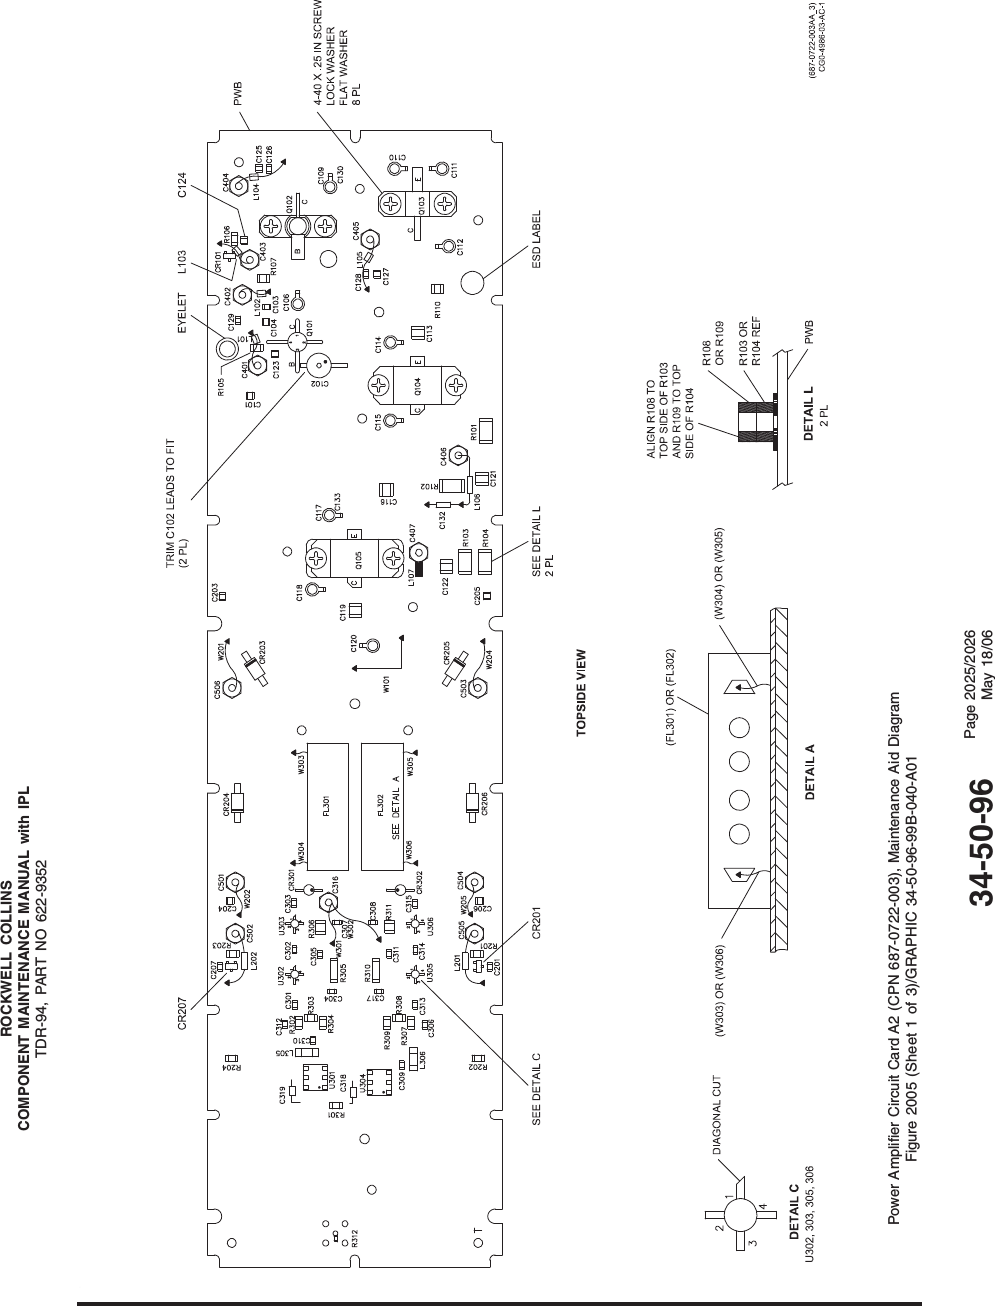 ROCKWELL COLLINSCOMPONENT MAINTENANCE MANUAL with IPLTDR-94, PART NO 622-9352Power Amplifier Circuit Card A2 (CPN 687-0722-003), Maintenance Aid DiagramFigure 2005 (Sheet 1 of 3)/GRAPHIC 34-50-96-99B-040-A0134-50-96 Page 2025/2026May 18/06